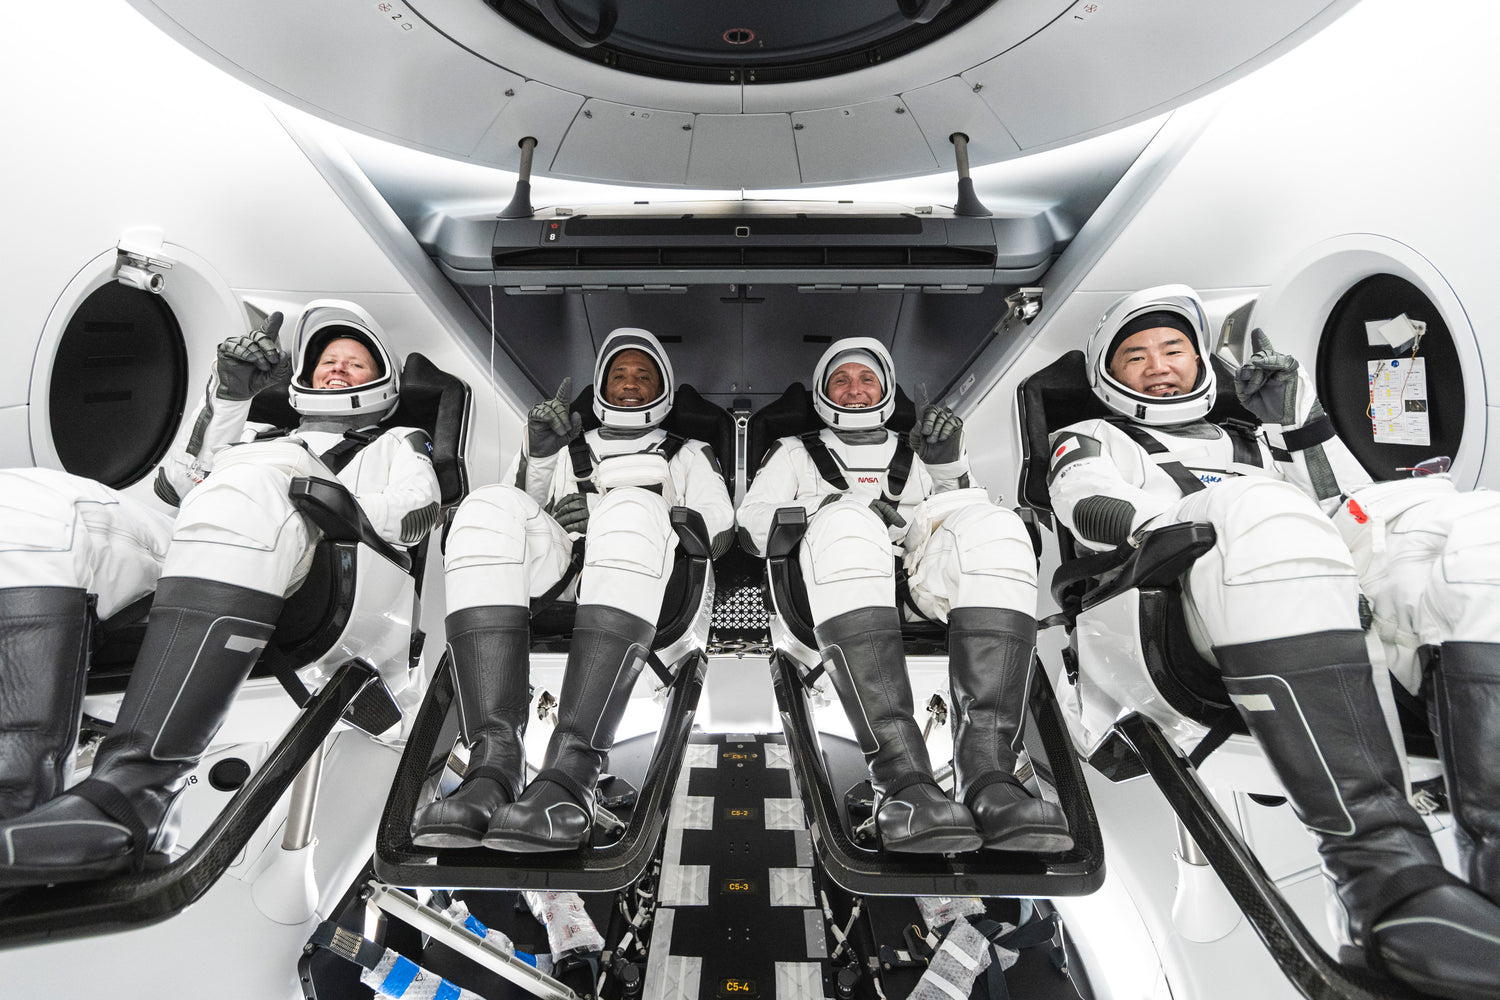 NASA sets date to launch four astronauts aboard SpaceX Crew Dragon